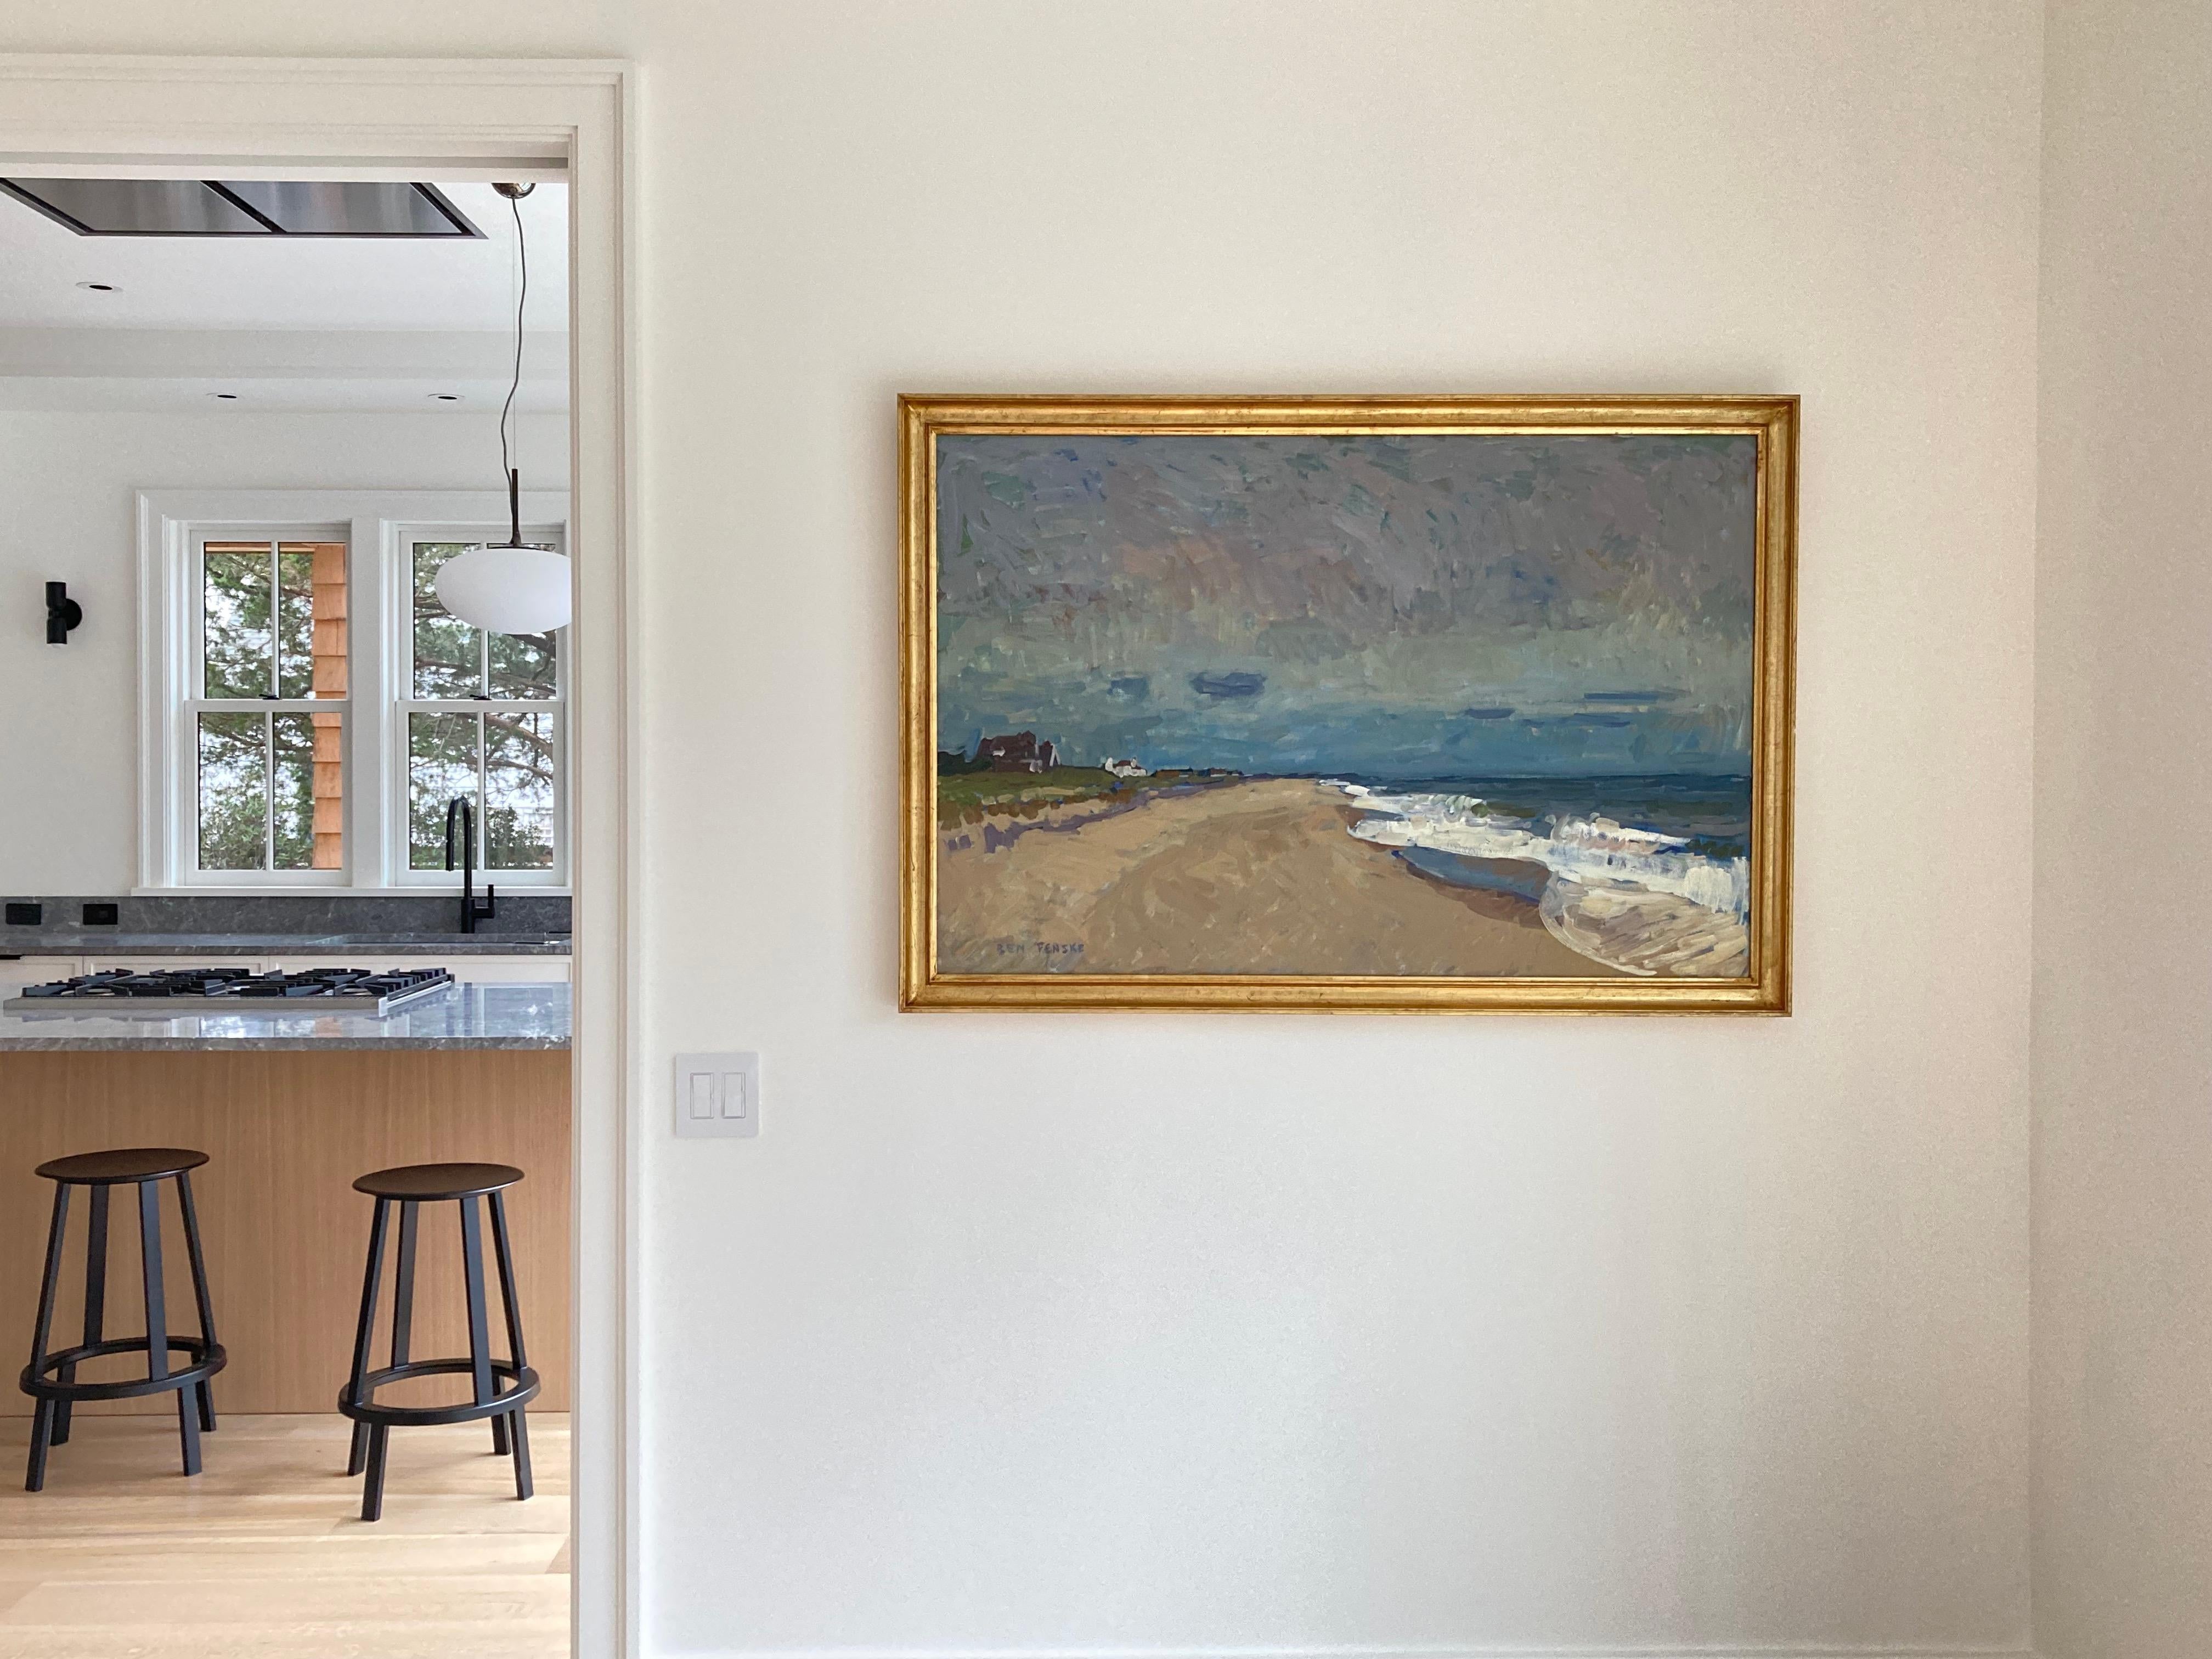 Fenske painted this quiet Sagaponack beach on Long Island, NY en plein air. 

Framed Dimensions: 35.5 x 51 inches

Artist Bio
Ben Fenske (b. 1978) although a native of Minnesota, and has been working and living in Sag Harbor, New York and Florence,